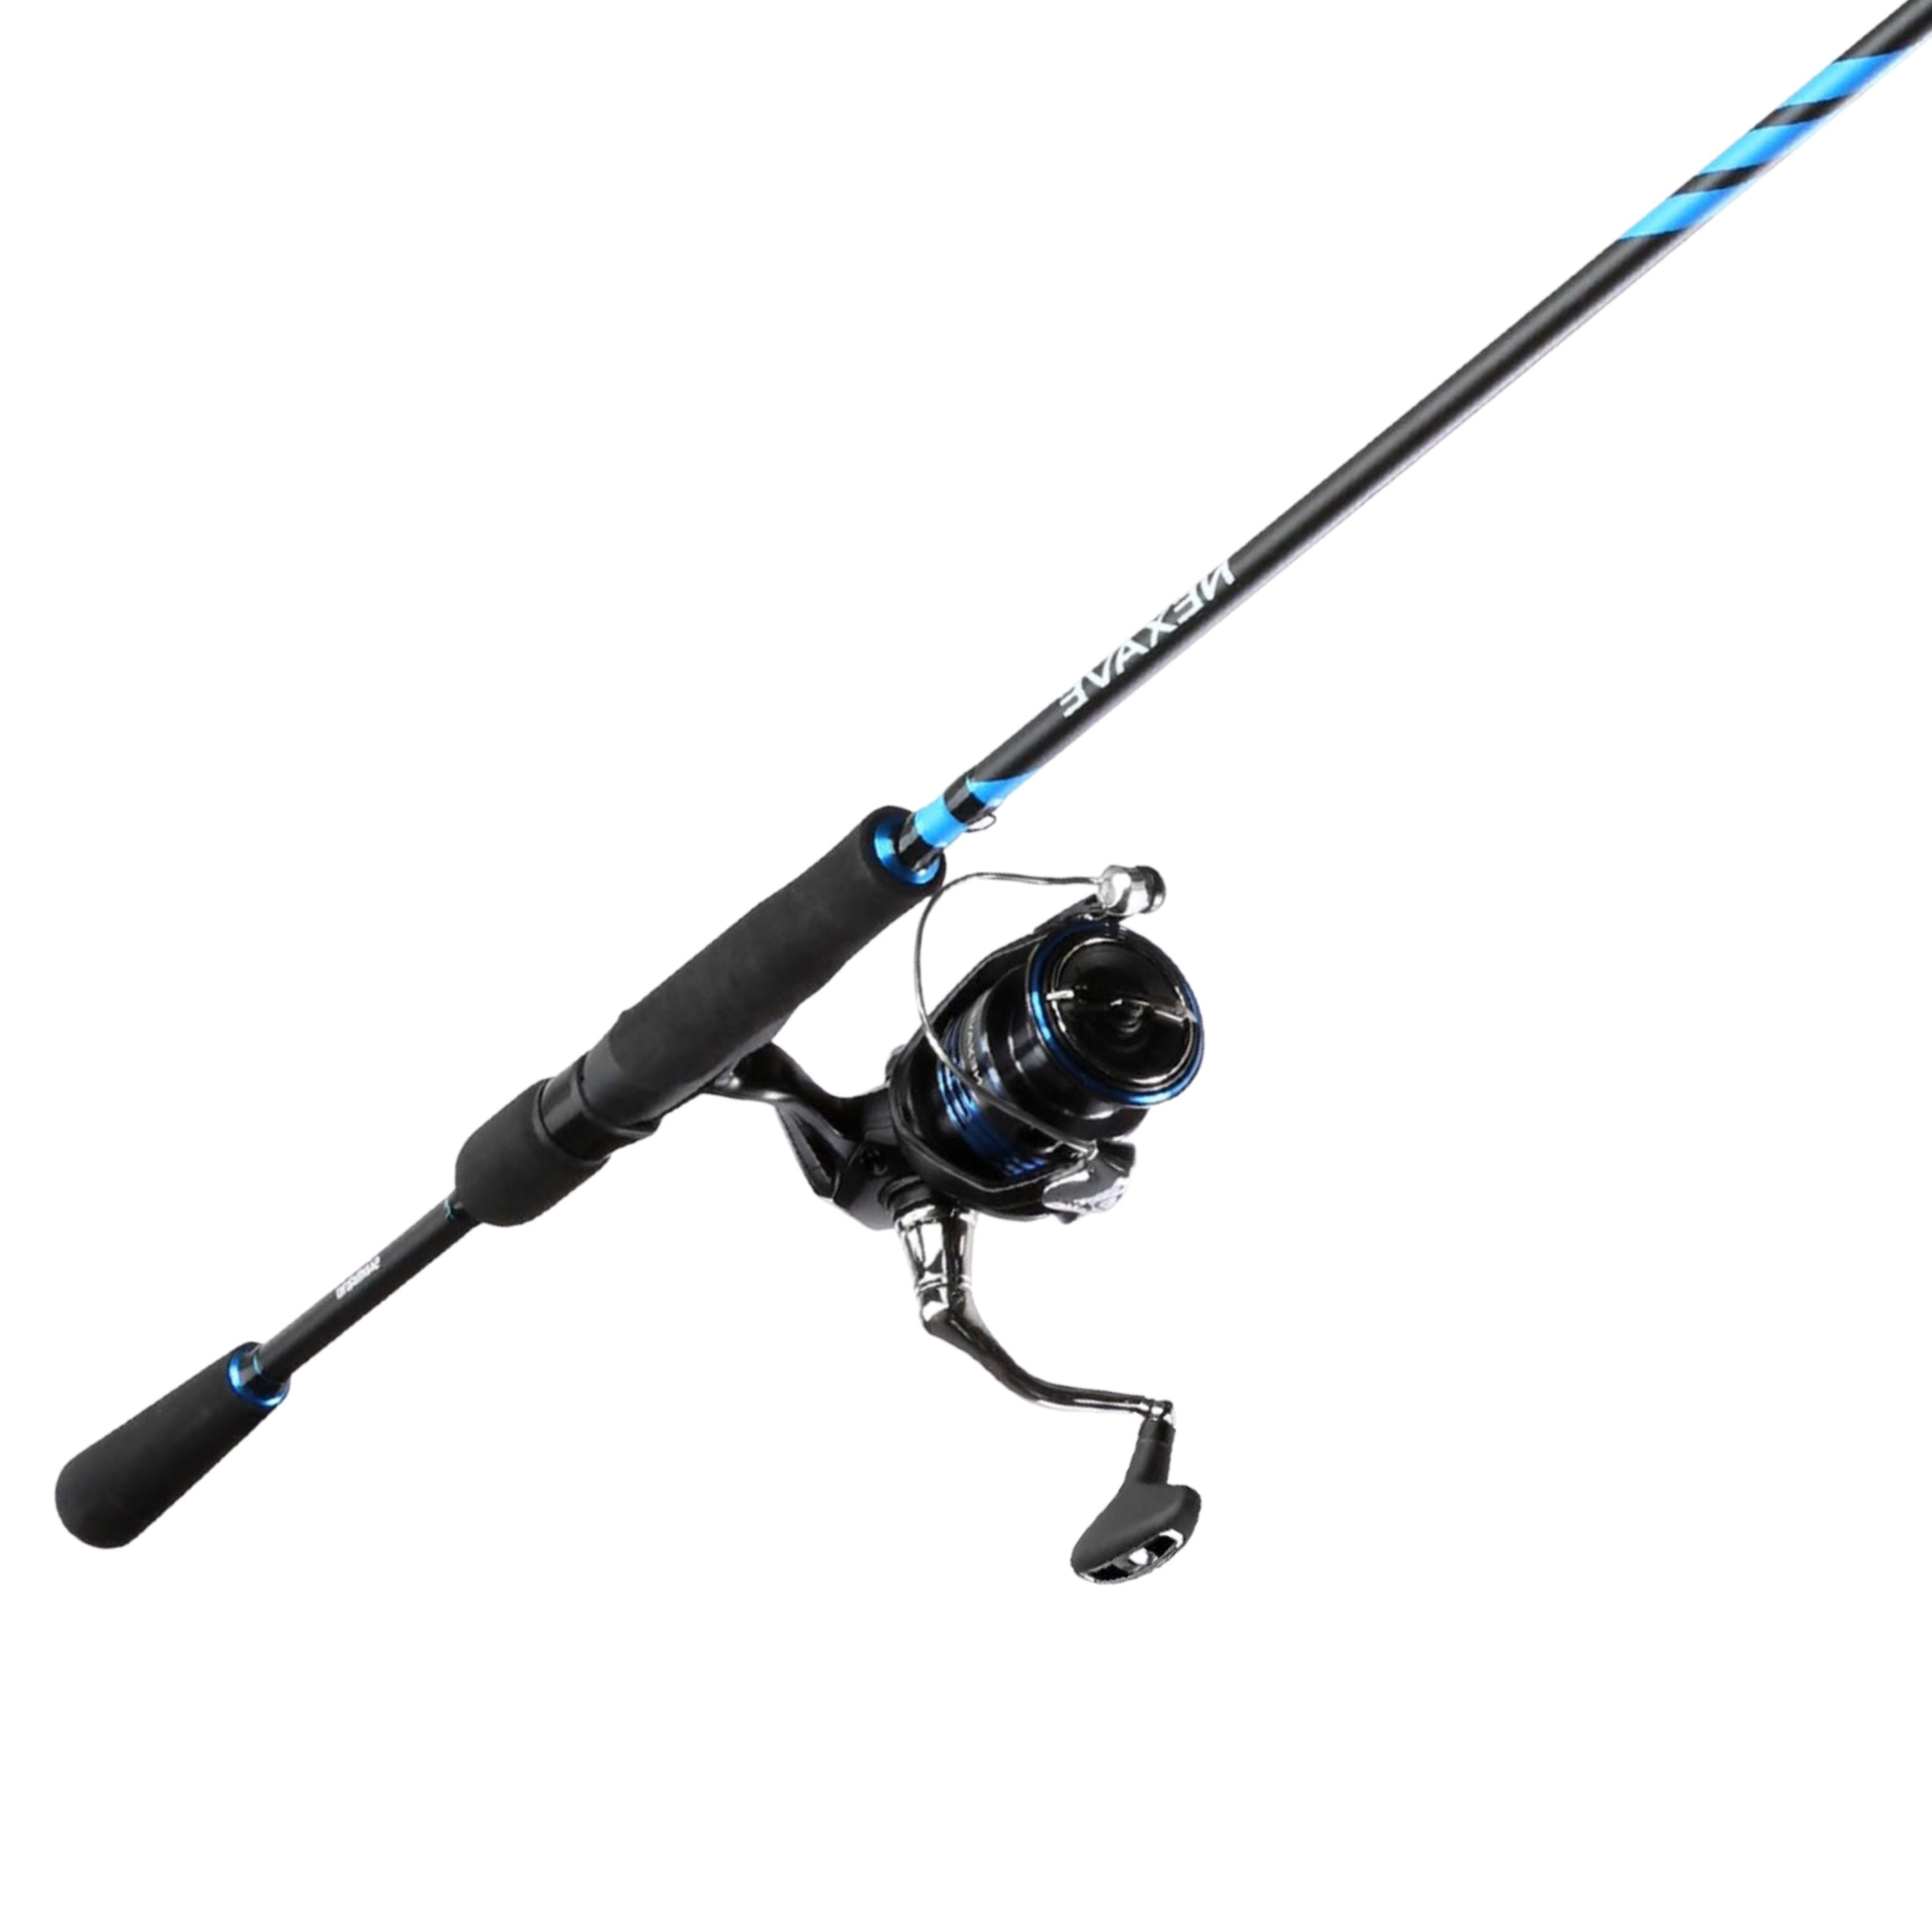 "Nexave" Spinning combo